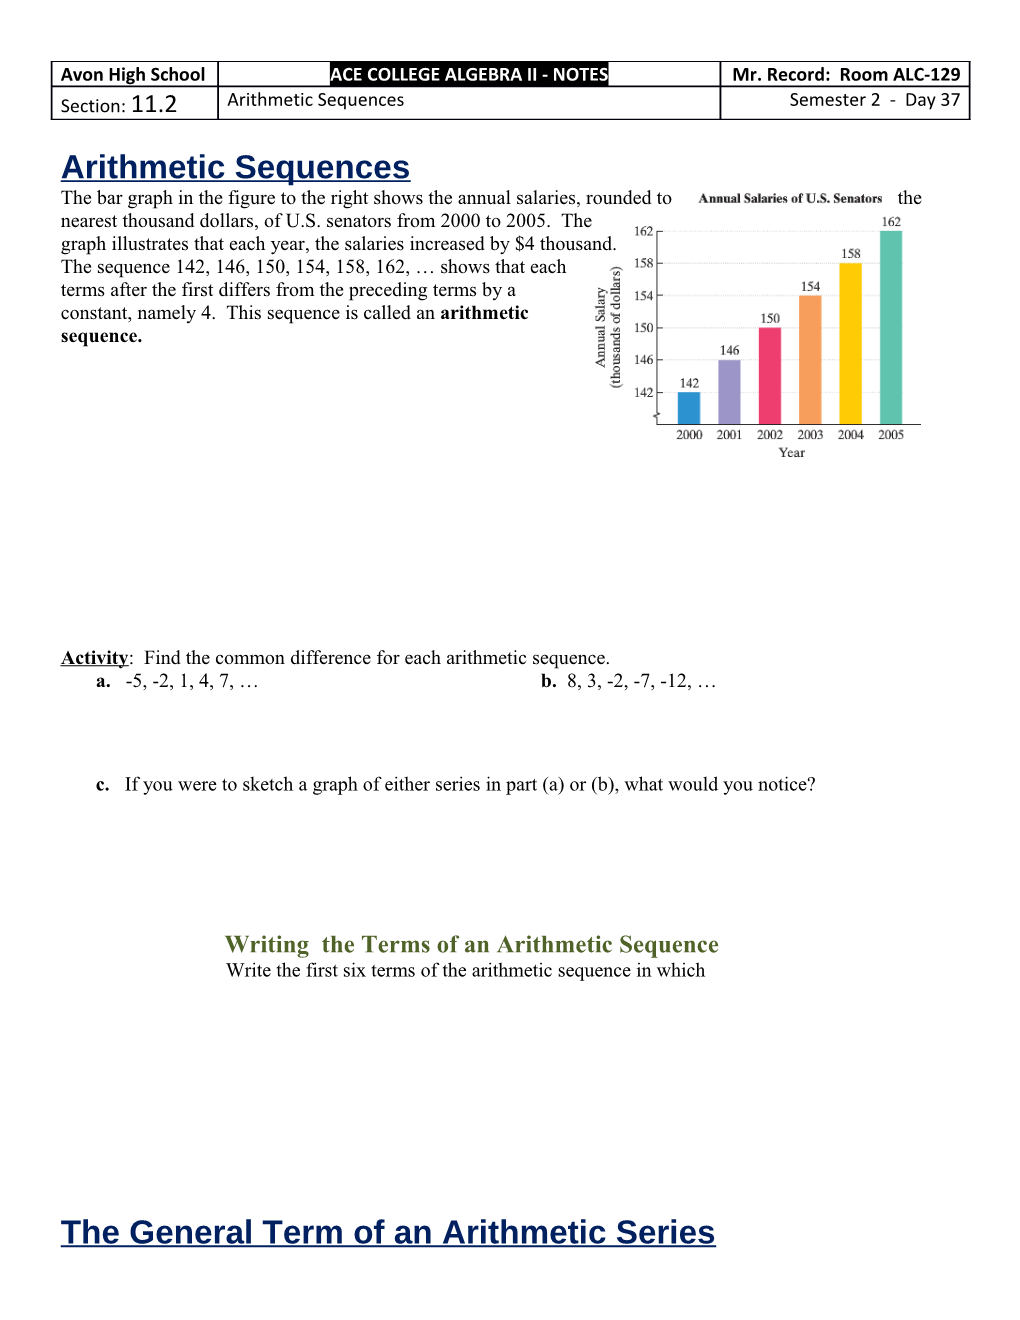 Activity: Find the Common Difference for Each Arithmetic Sequence